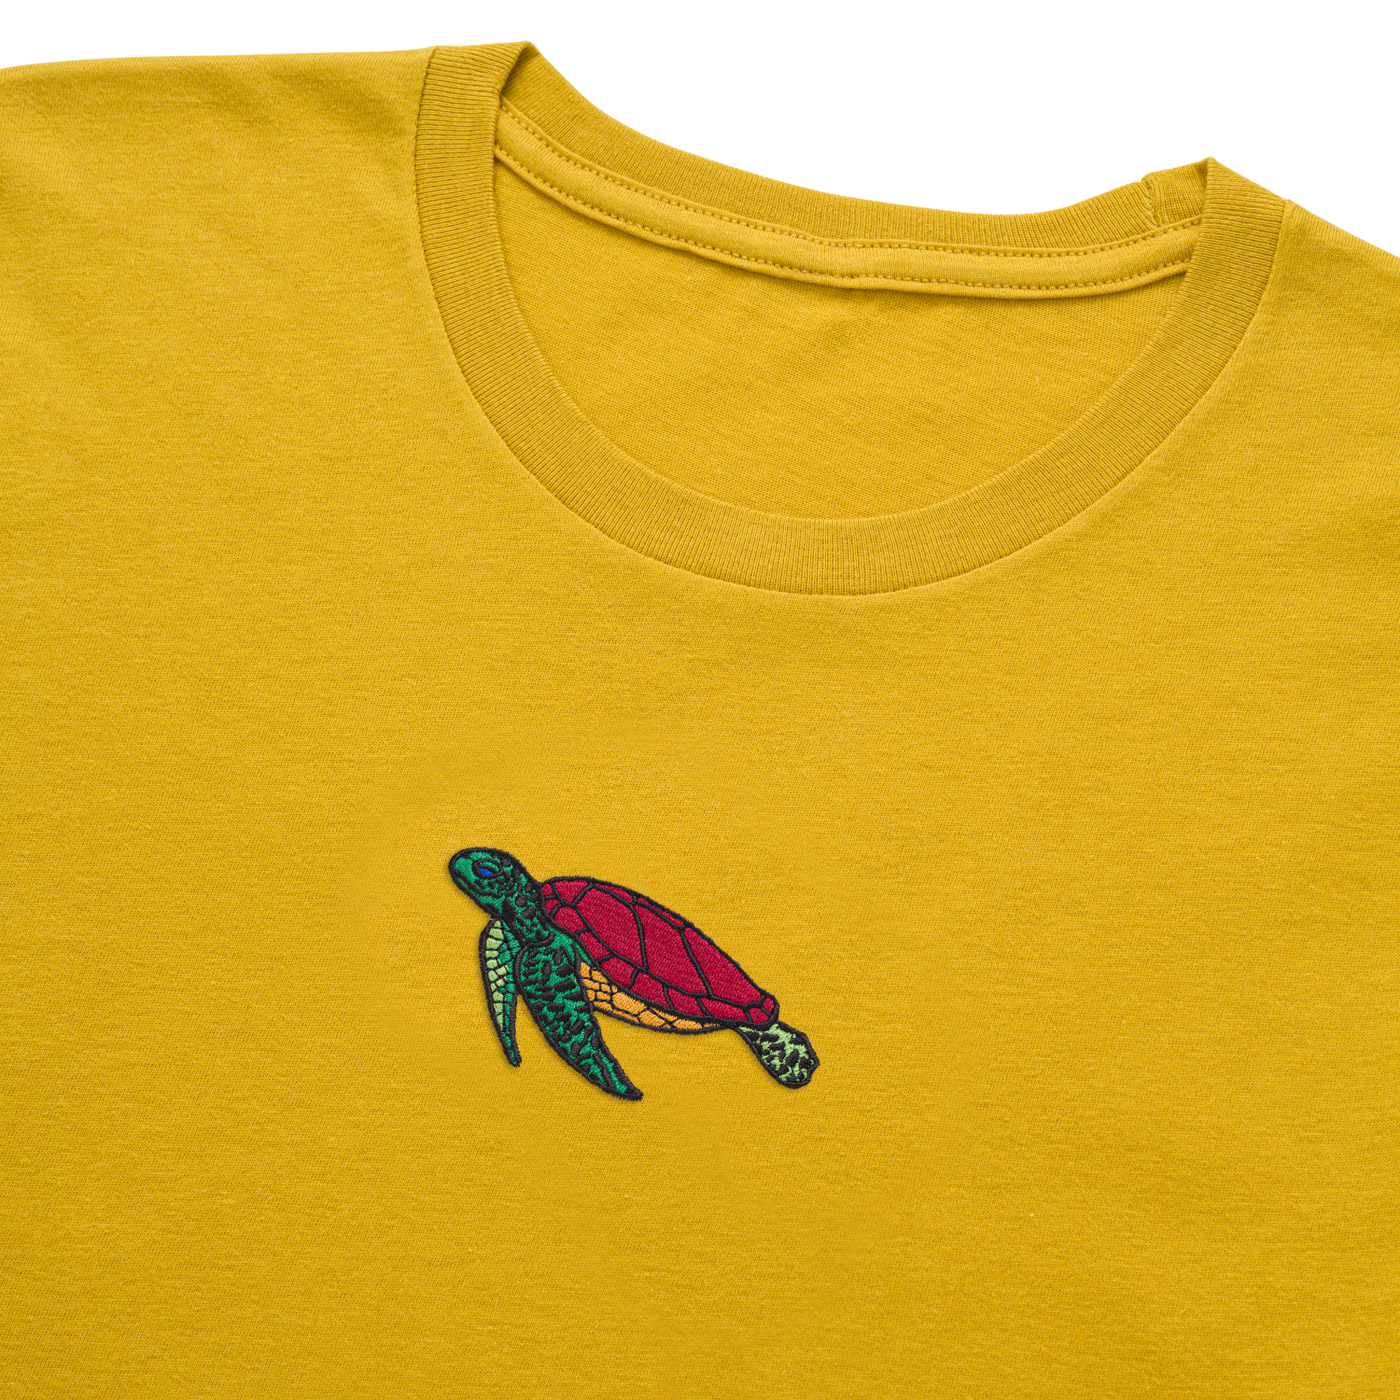 Bobby's Planet Women's Embroidered Sea Turtle T-Shirt from Seven Seas Fish Animals Collection in Mustard Color#color_mustard